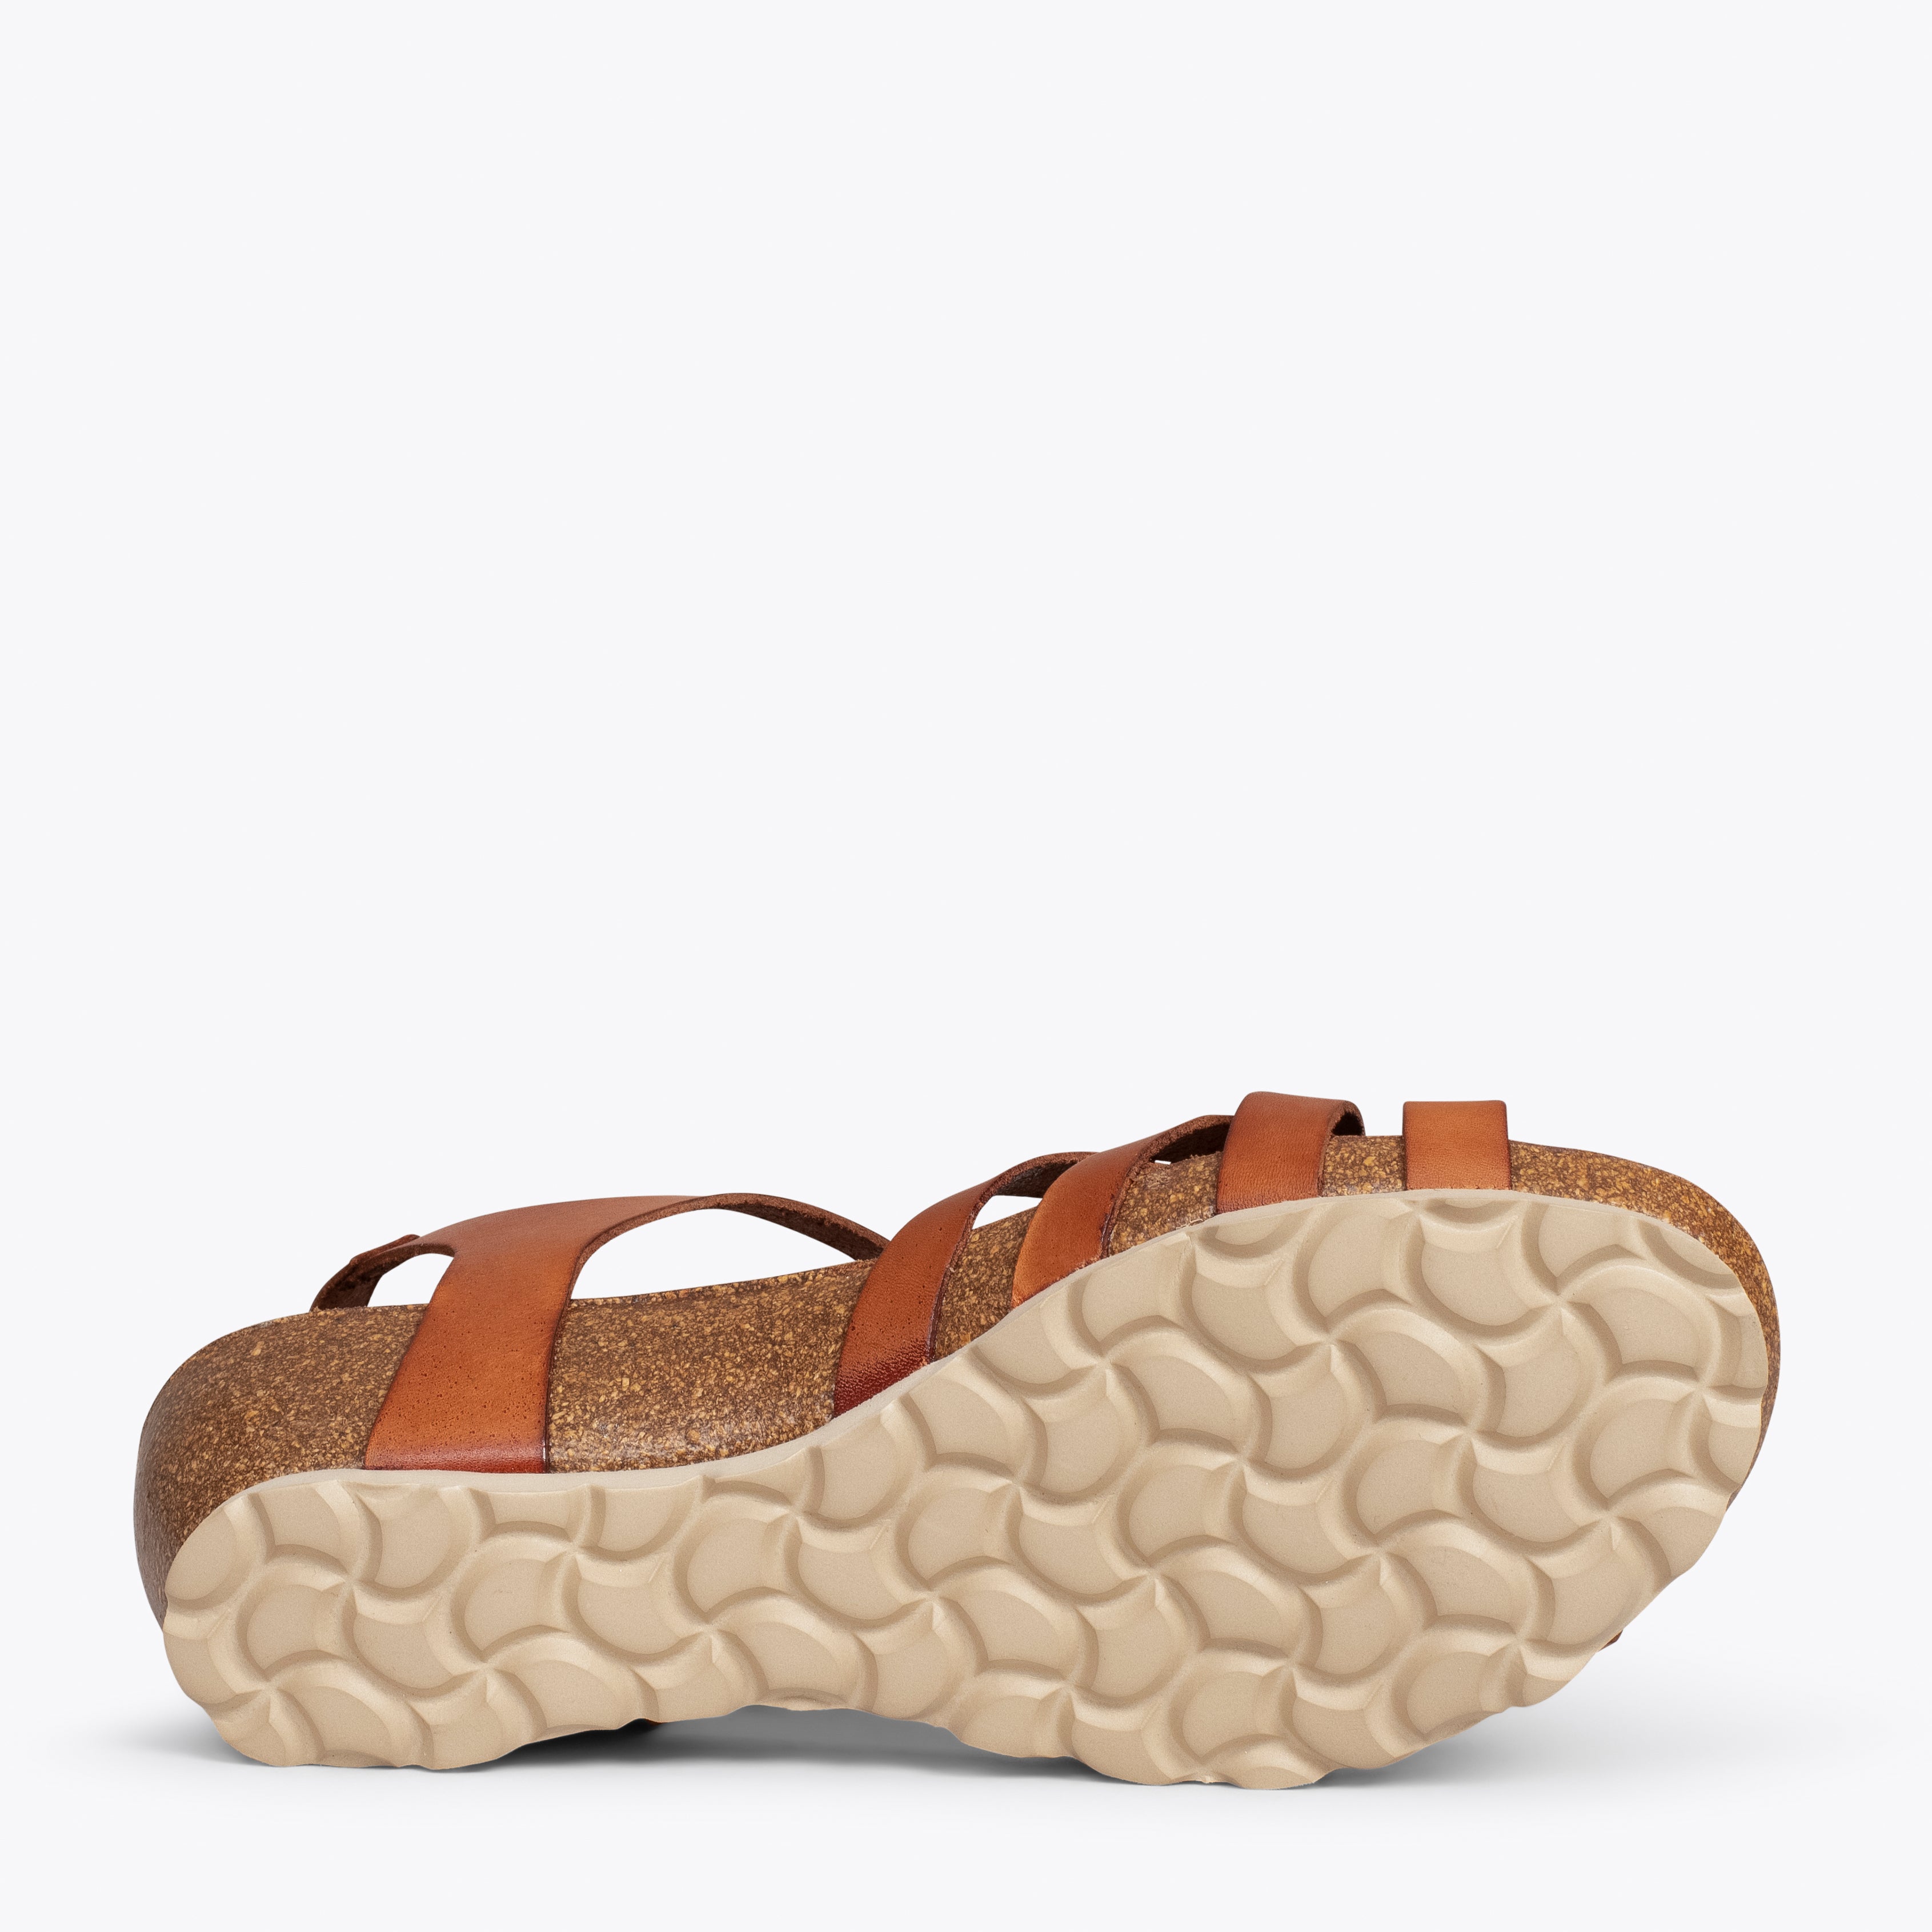 SOFT – CAMEL sandals with BIO wedge